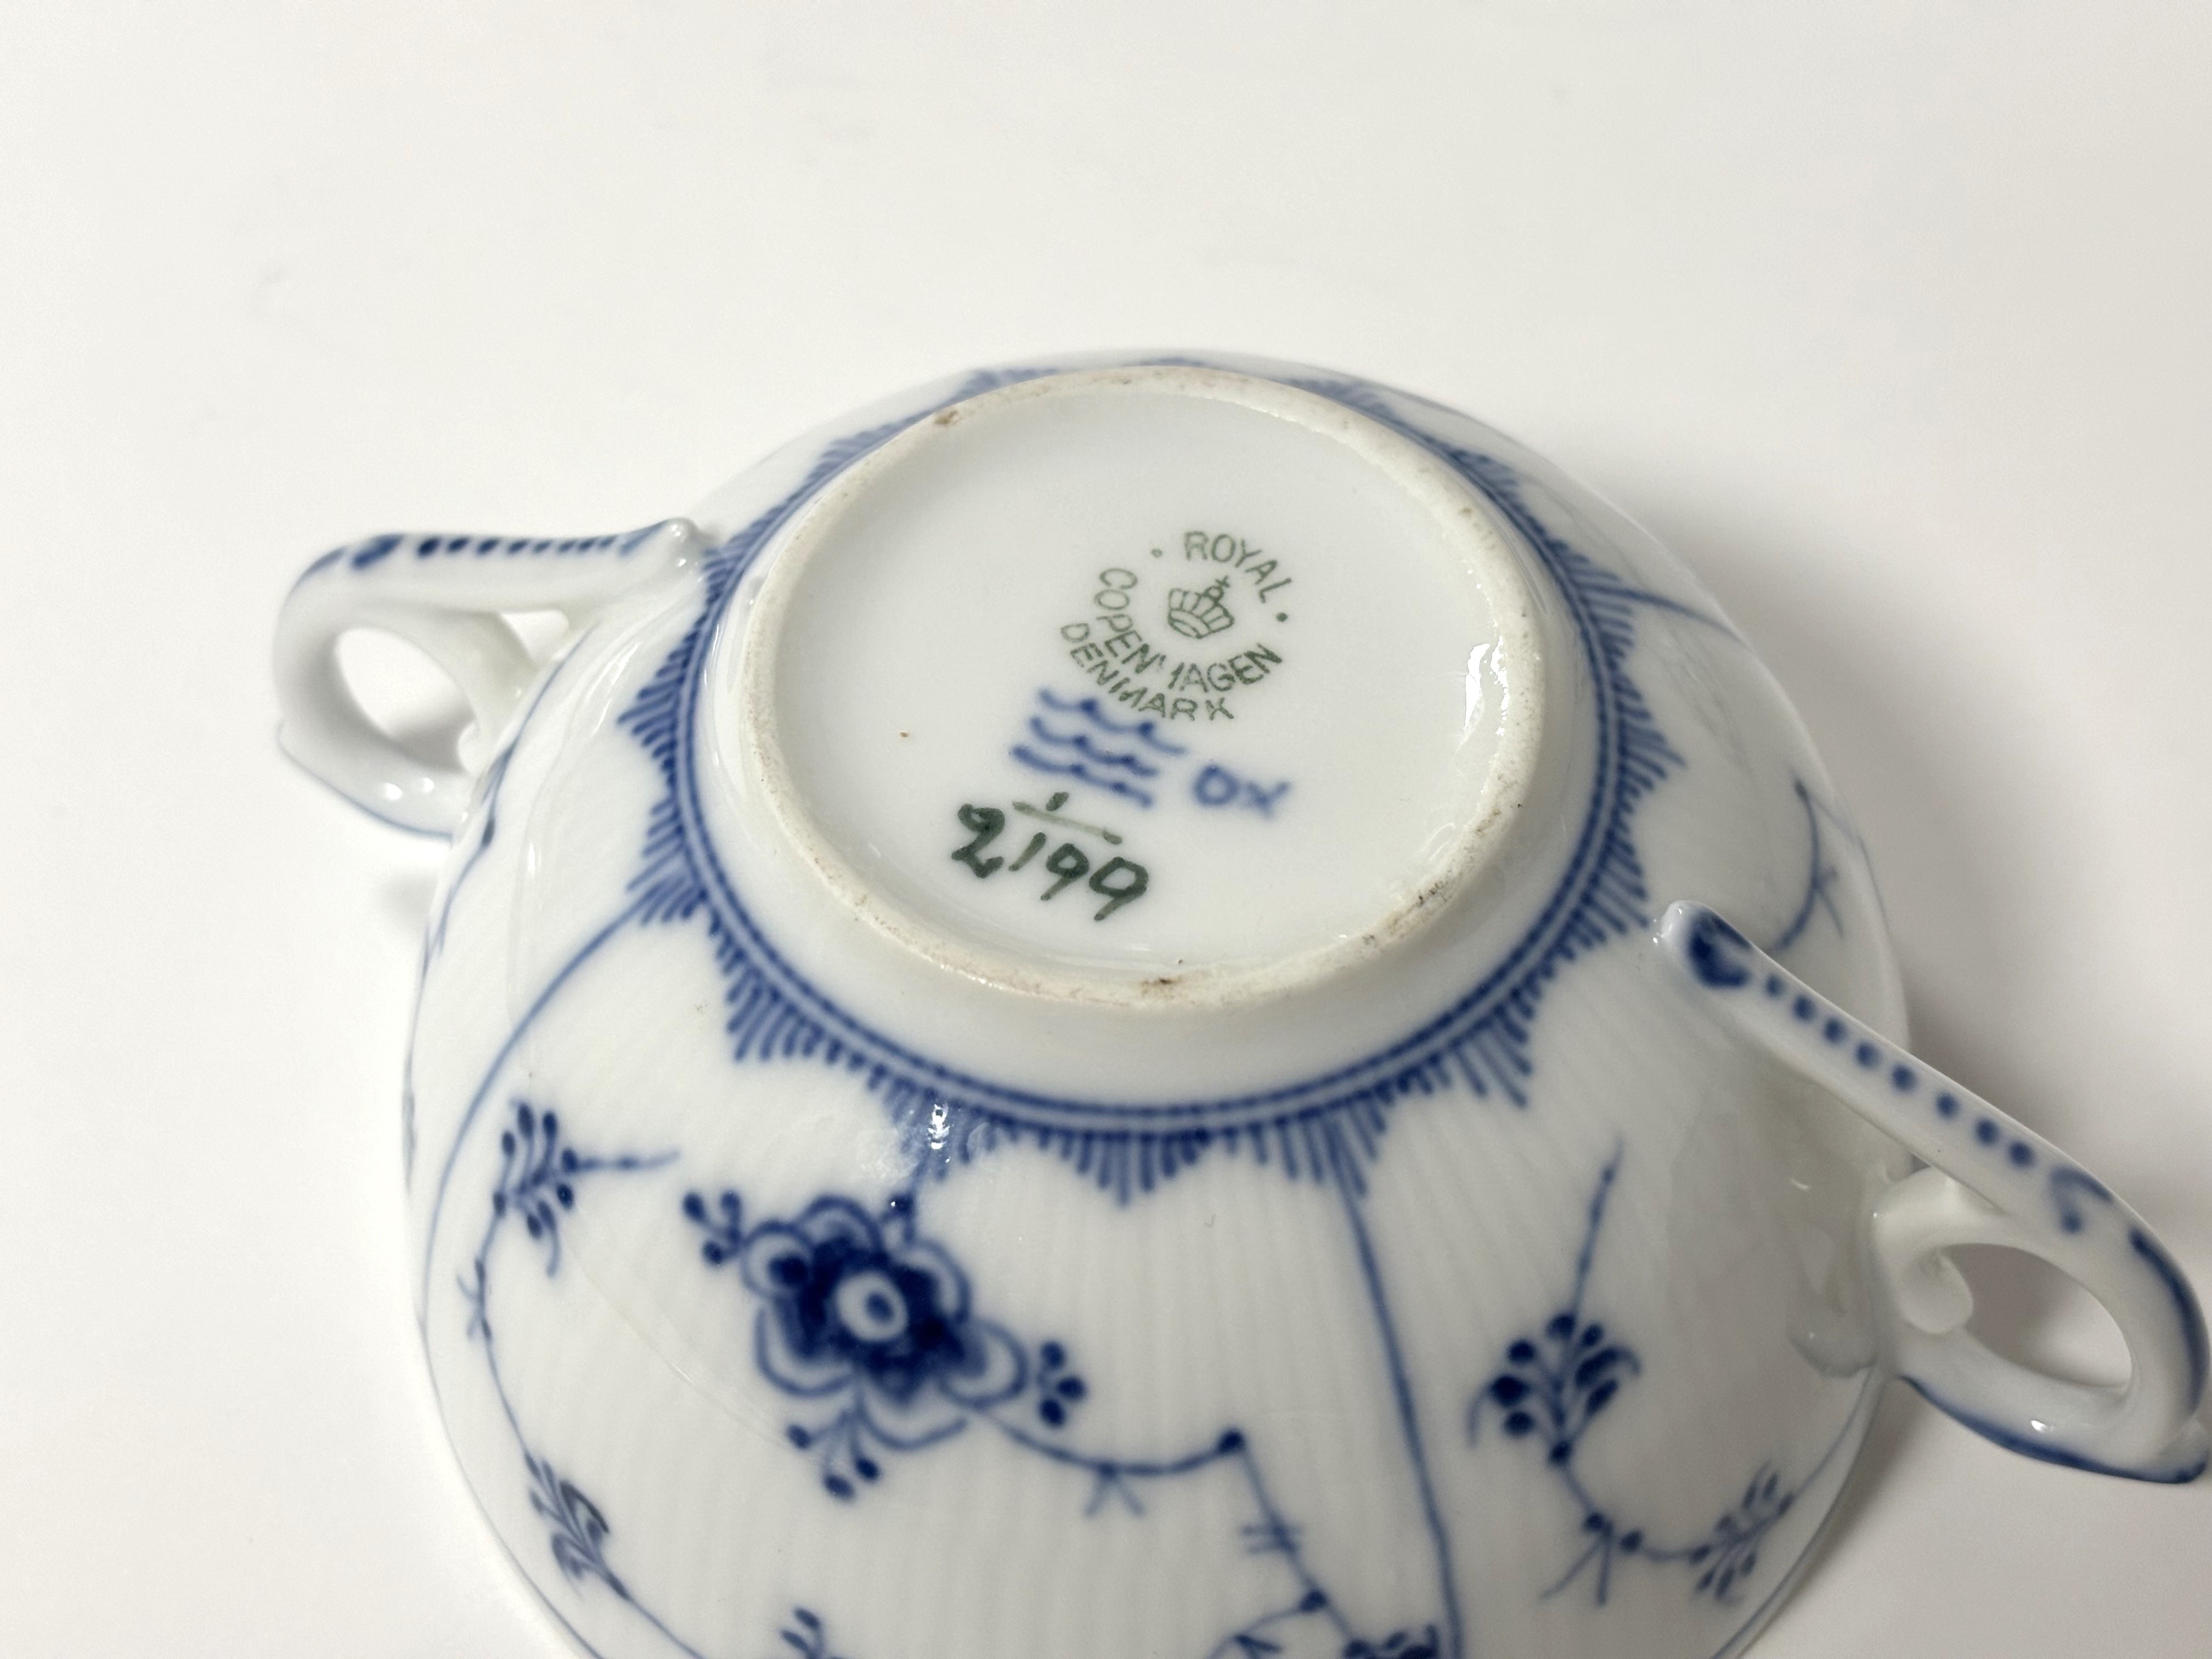 A set of six Royal Copenhagen soup cups and covers in the plain fluted blue pattern (Musselmalet), - Image 5 of 8